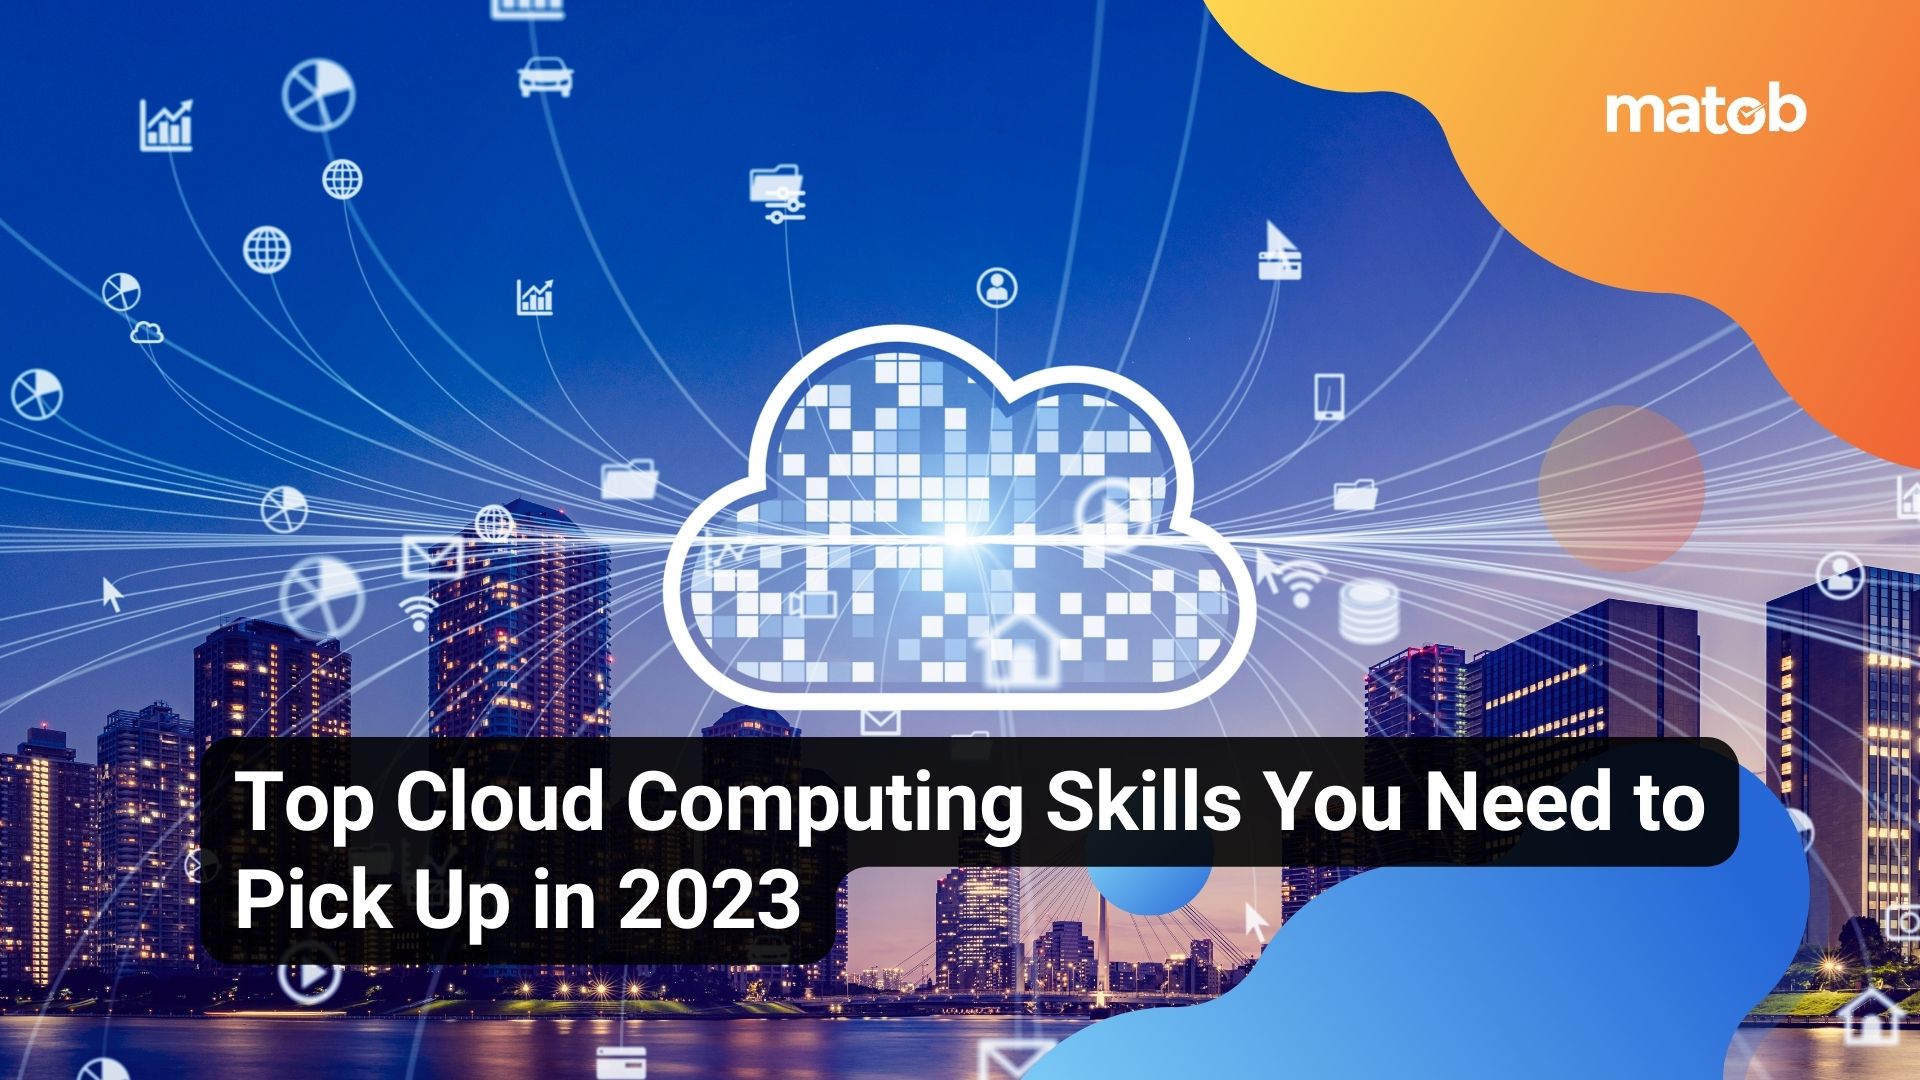 Top Cloud Computing Skills You Need to Pick Up in 2023